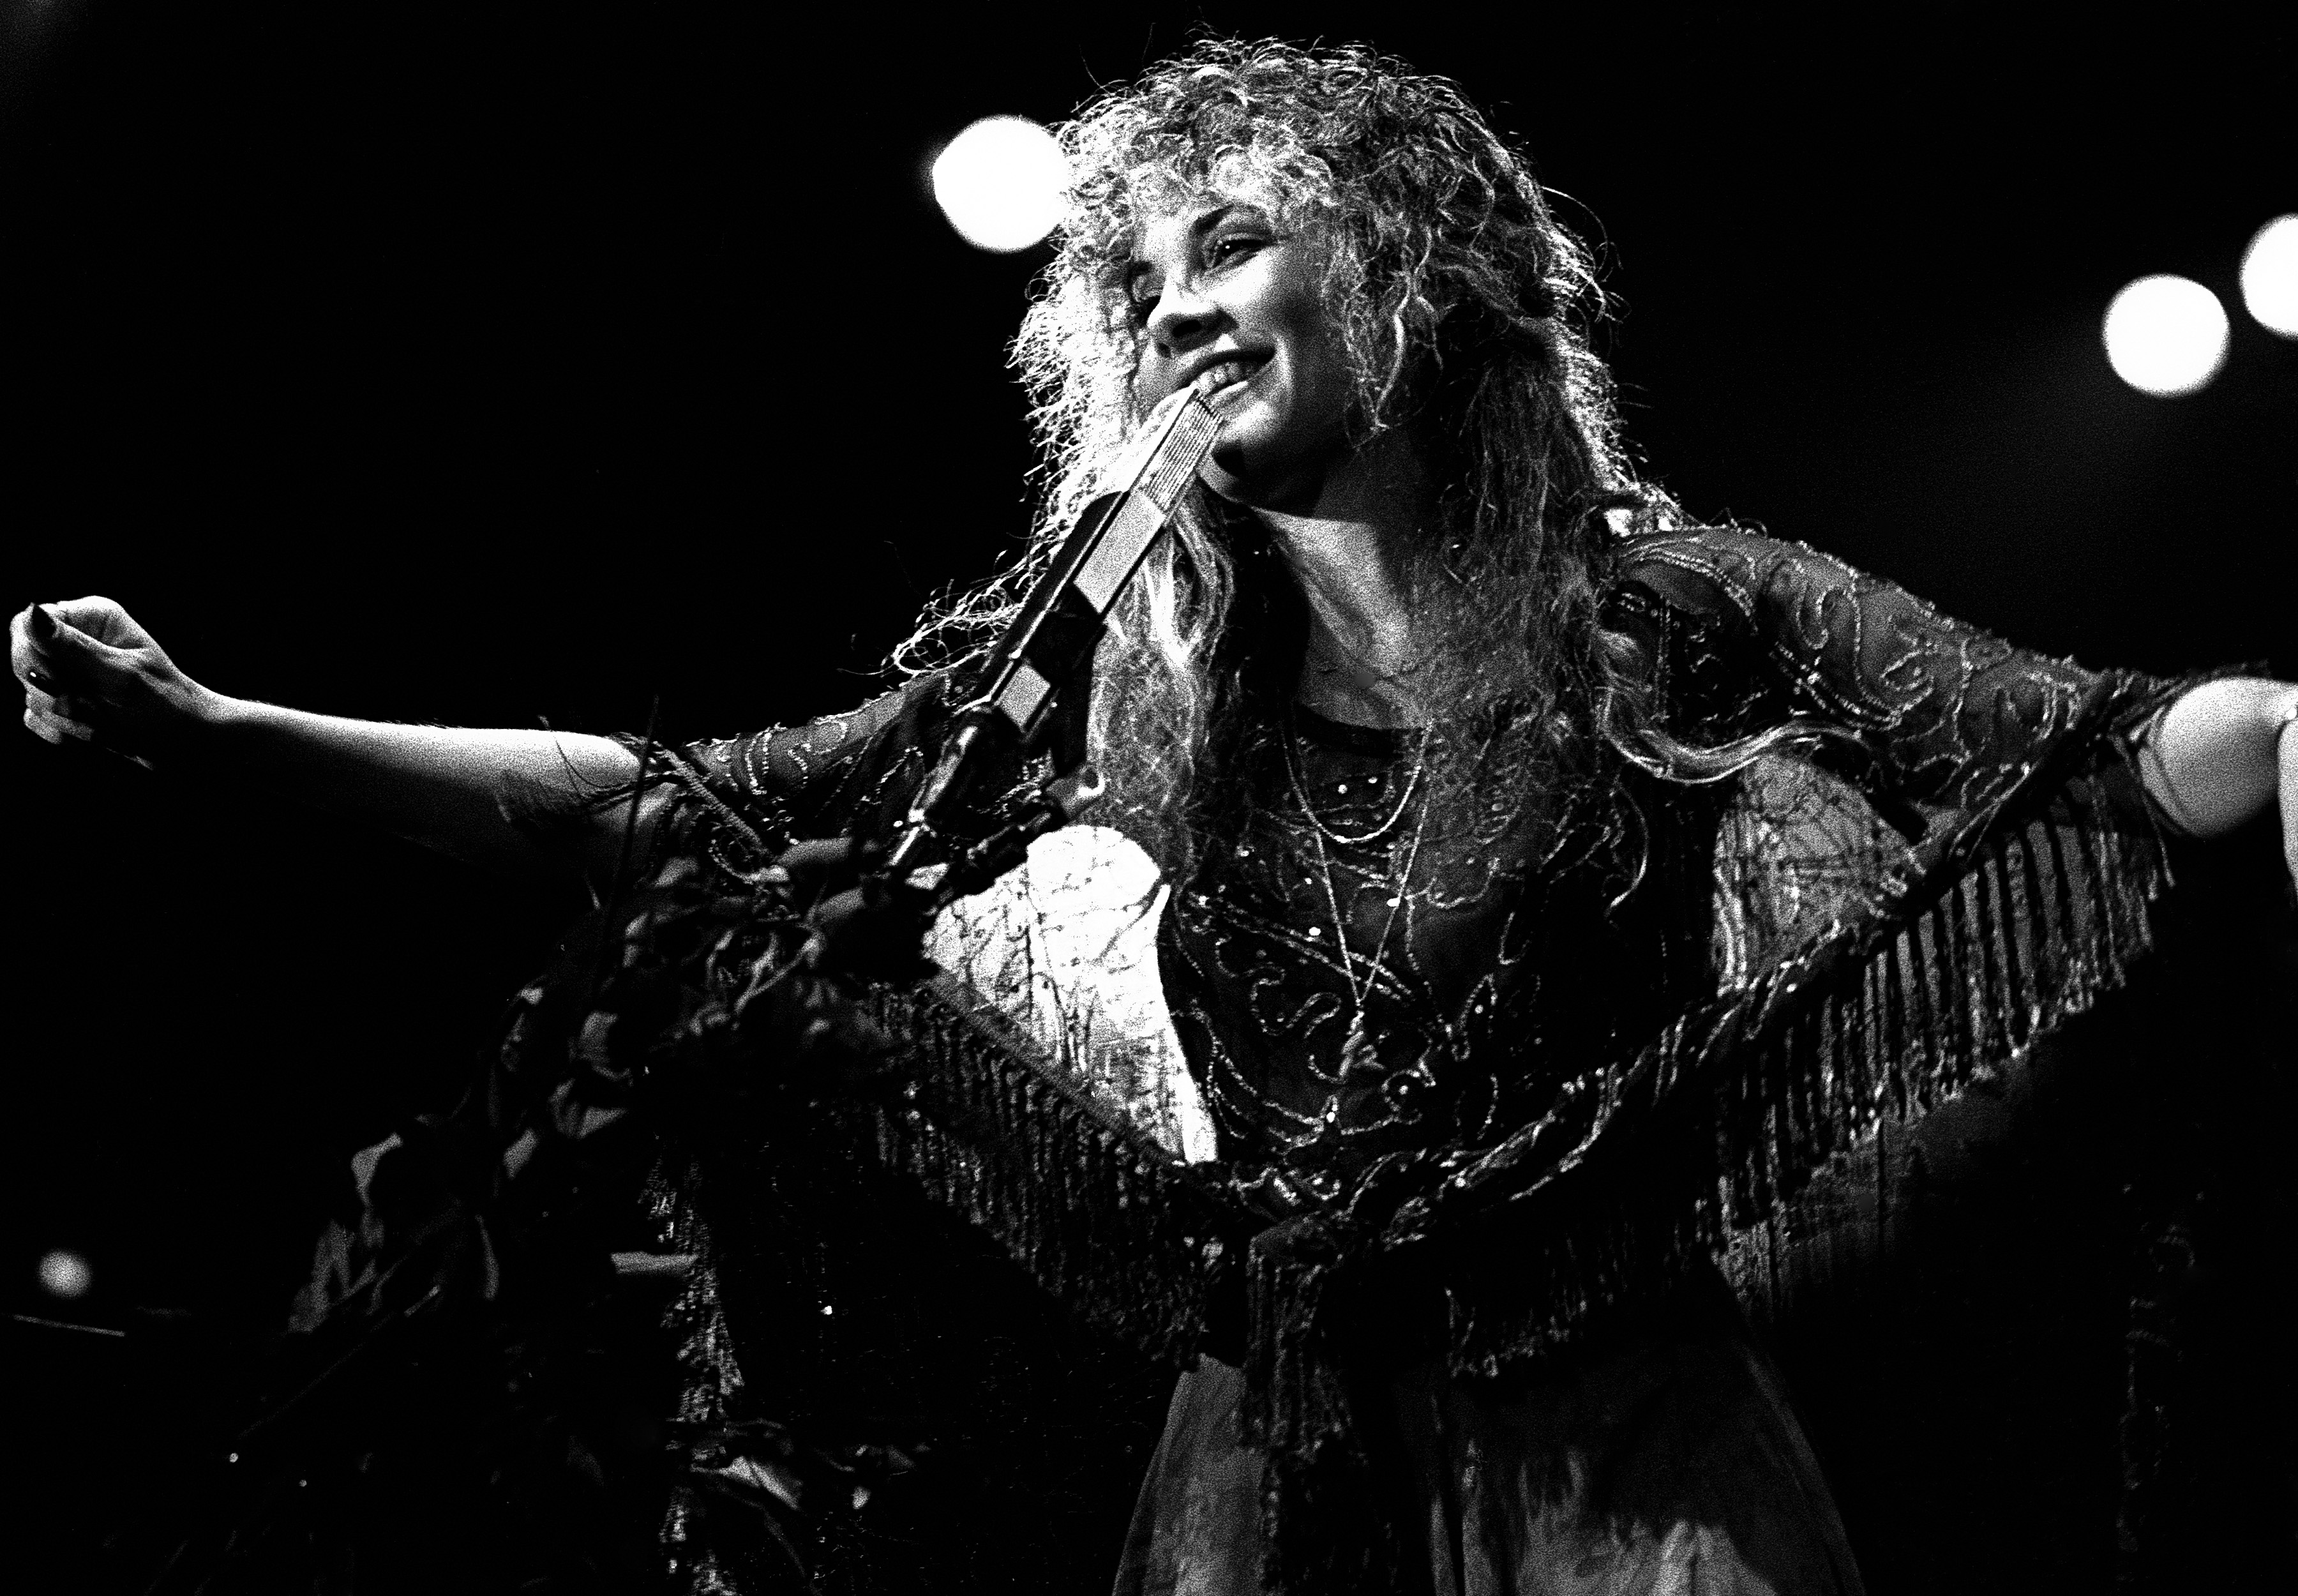 Fleetwood Mac's Stevie Nicks in front of a microphone